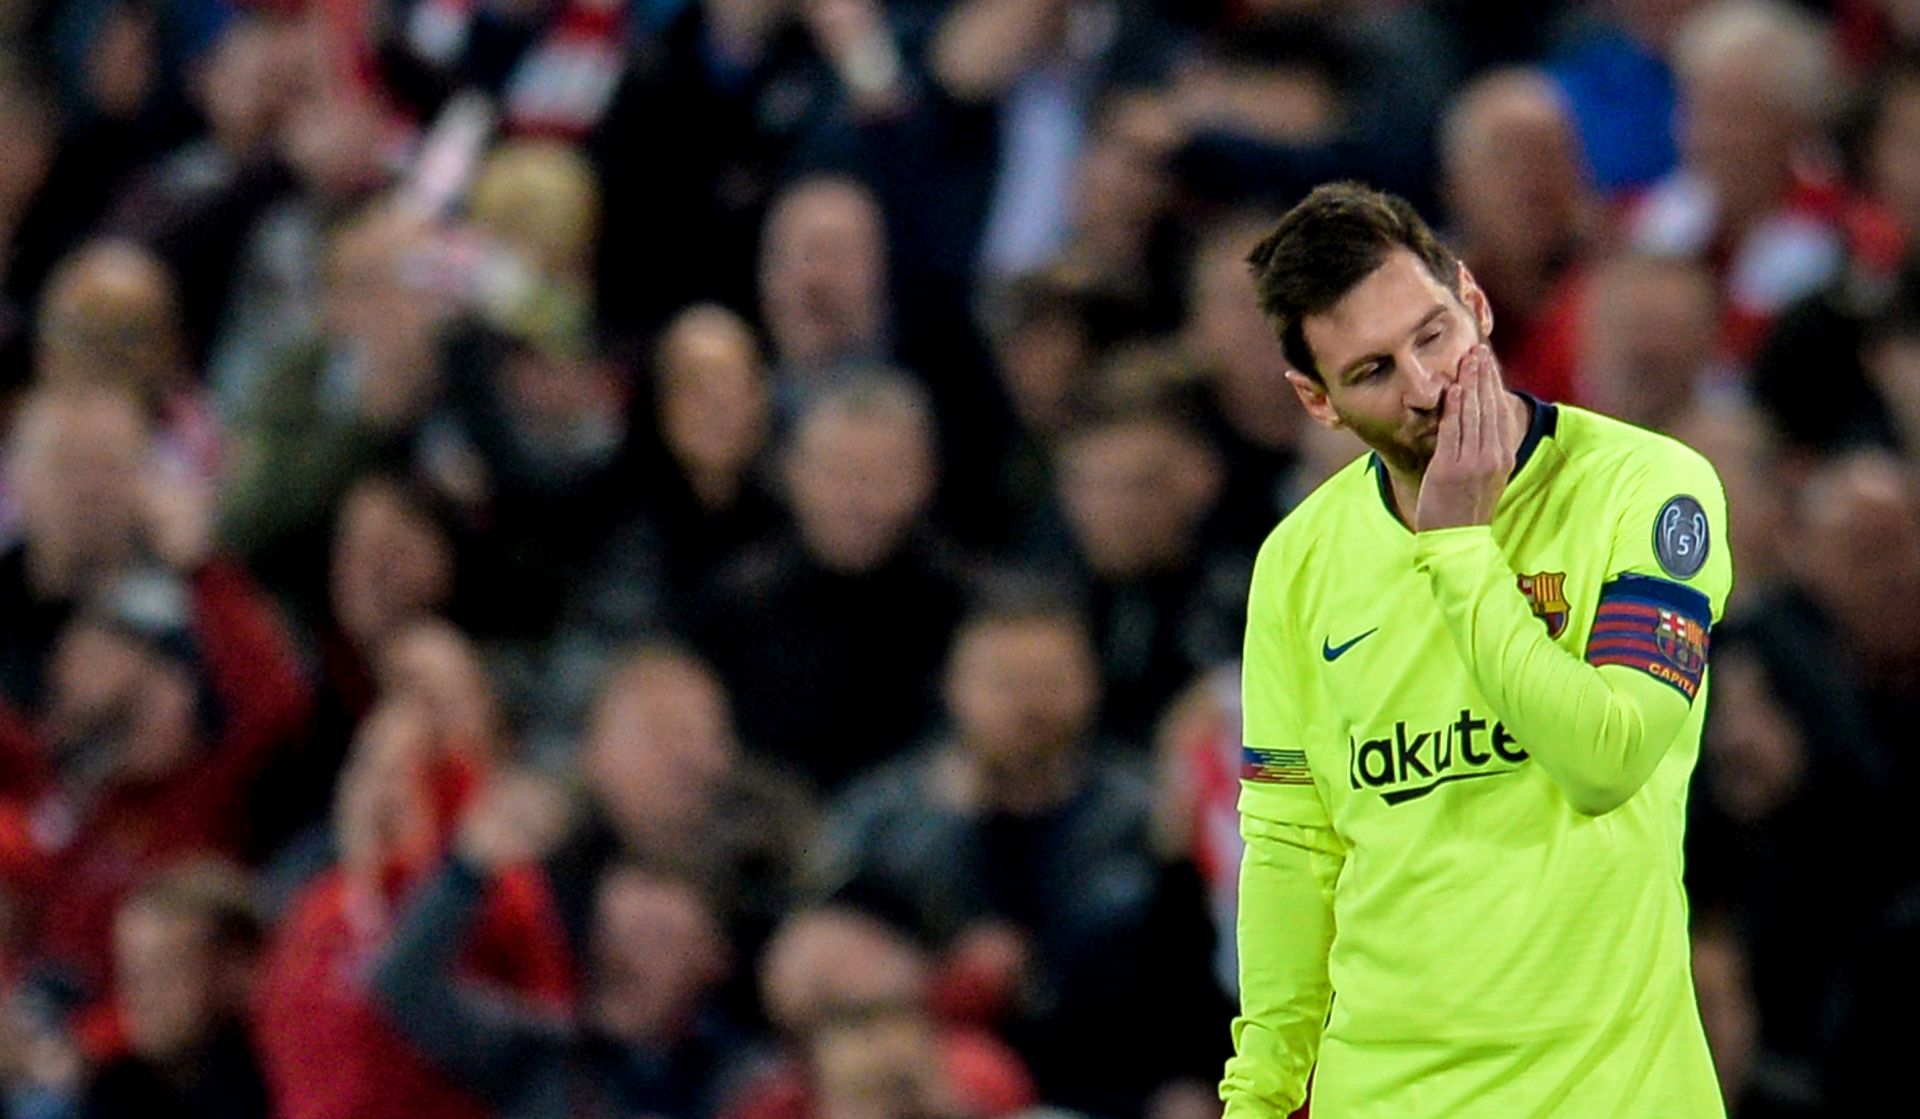 epa07554639 Barcelona's Lionel Messi reacts during the UEFA Champions League semi final second leg soccer match between Liverpool FC and FC Barcelona at Anfield stadium in Liverpool, Britain, 07 May 2019.  EPA/PETER POWELL